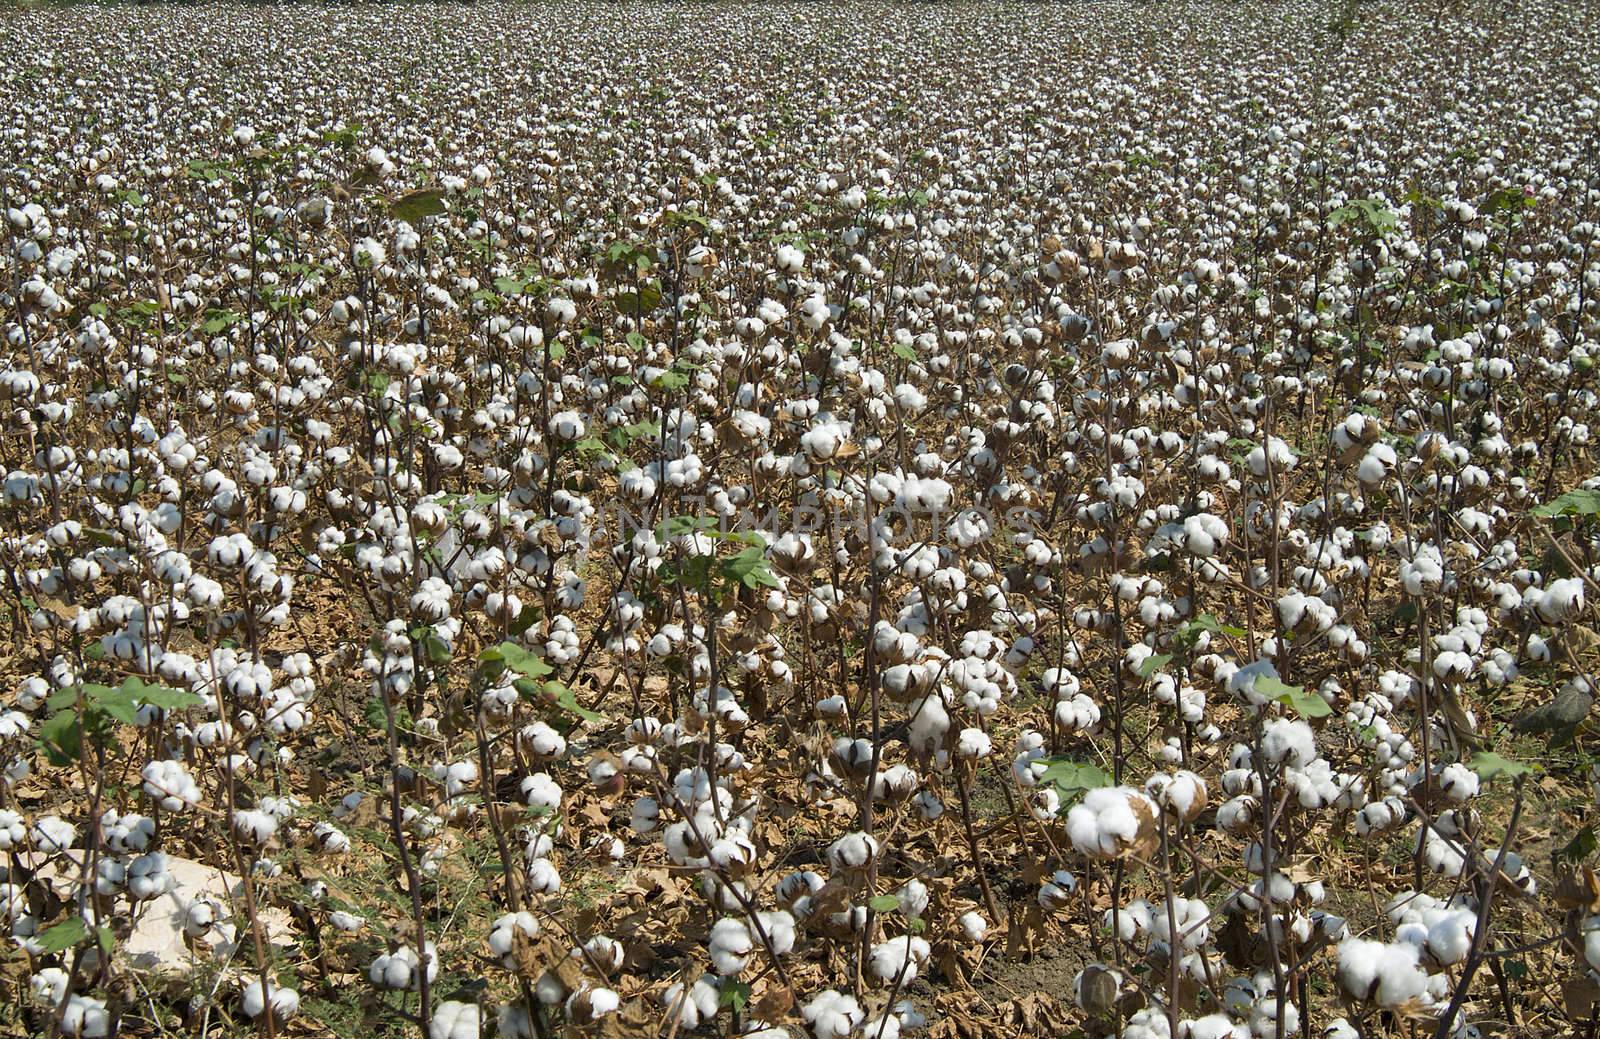 General view of a field full of ripe cotton bolls